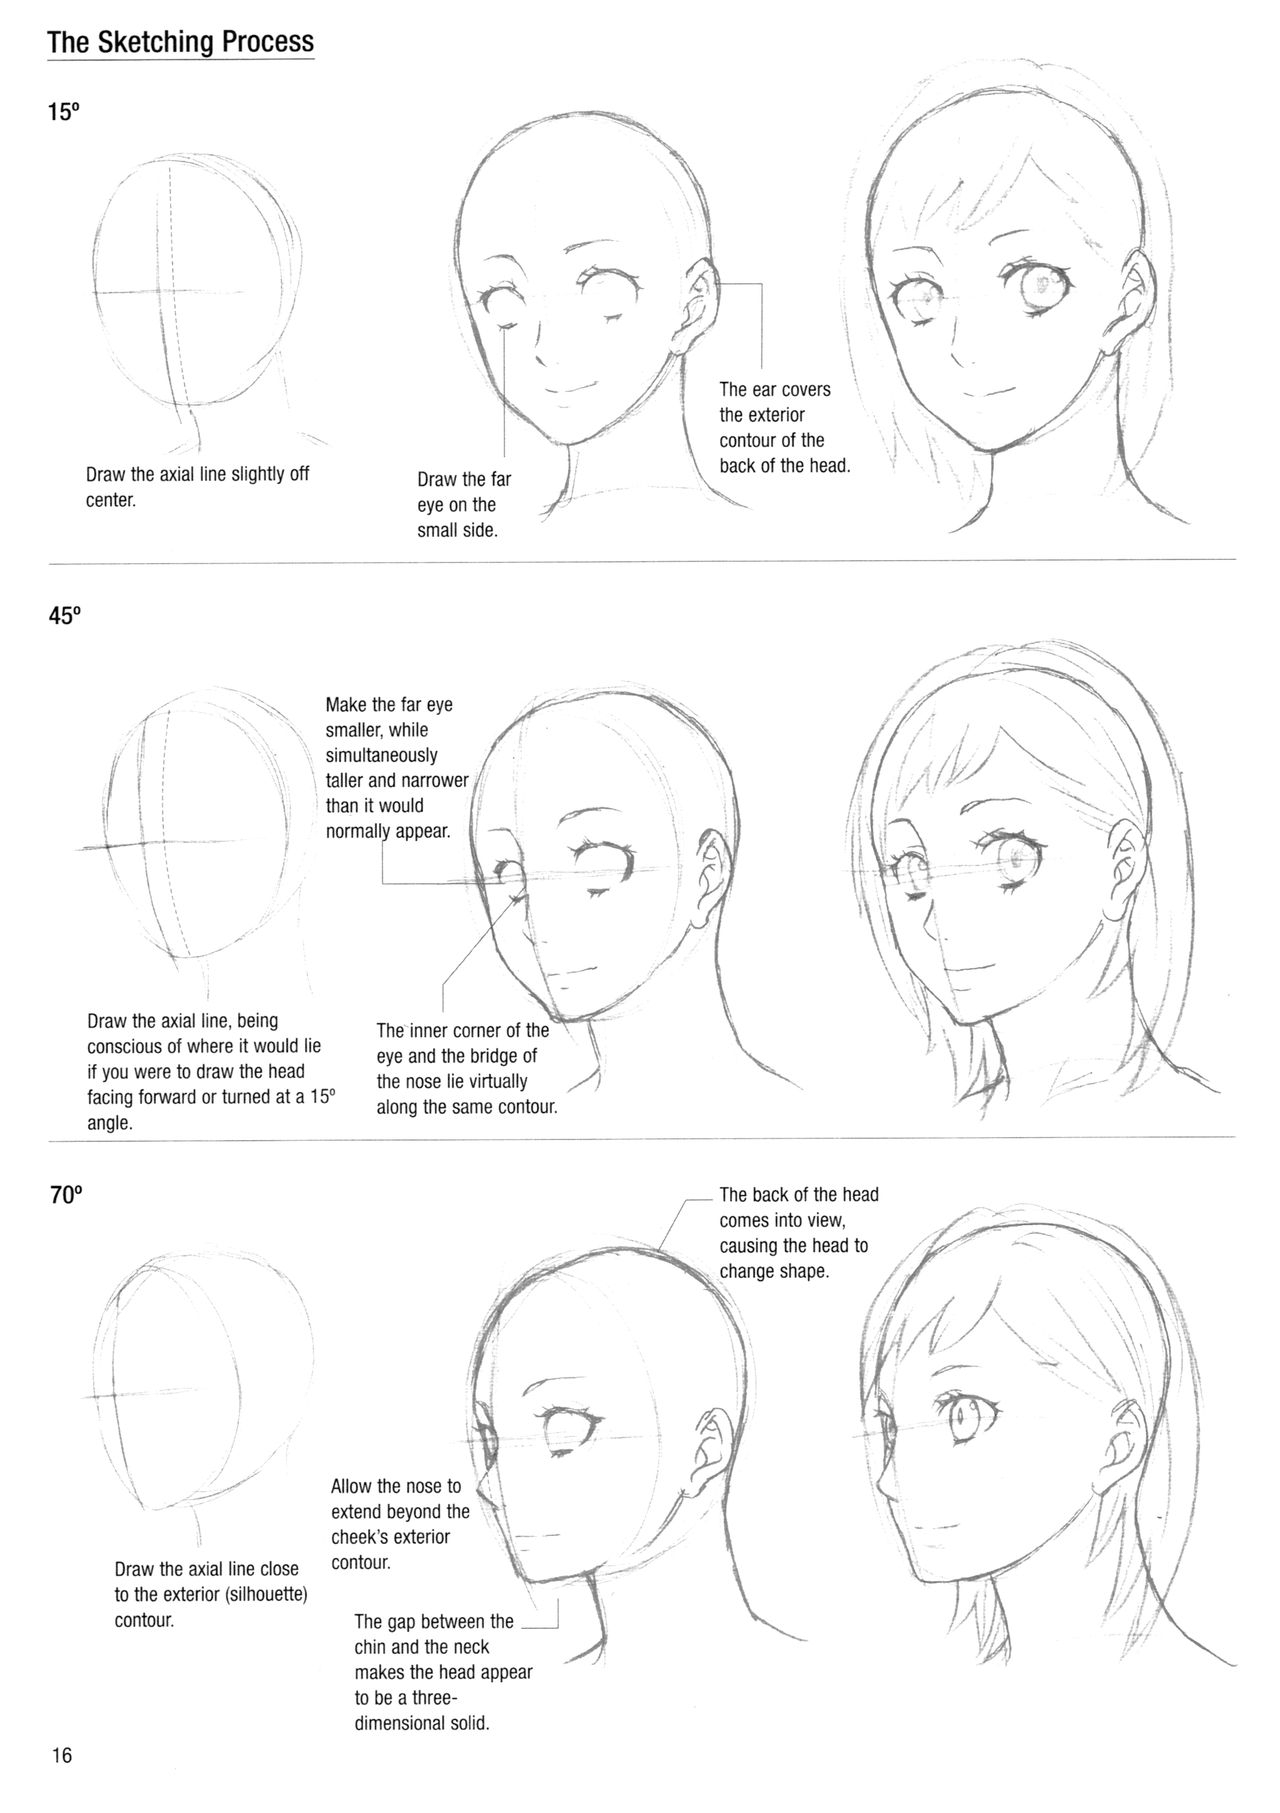 Sketching Manga-Style Vol. 3 - Unforgettable Characters 15